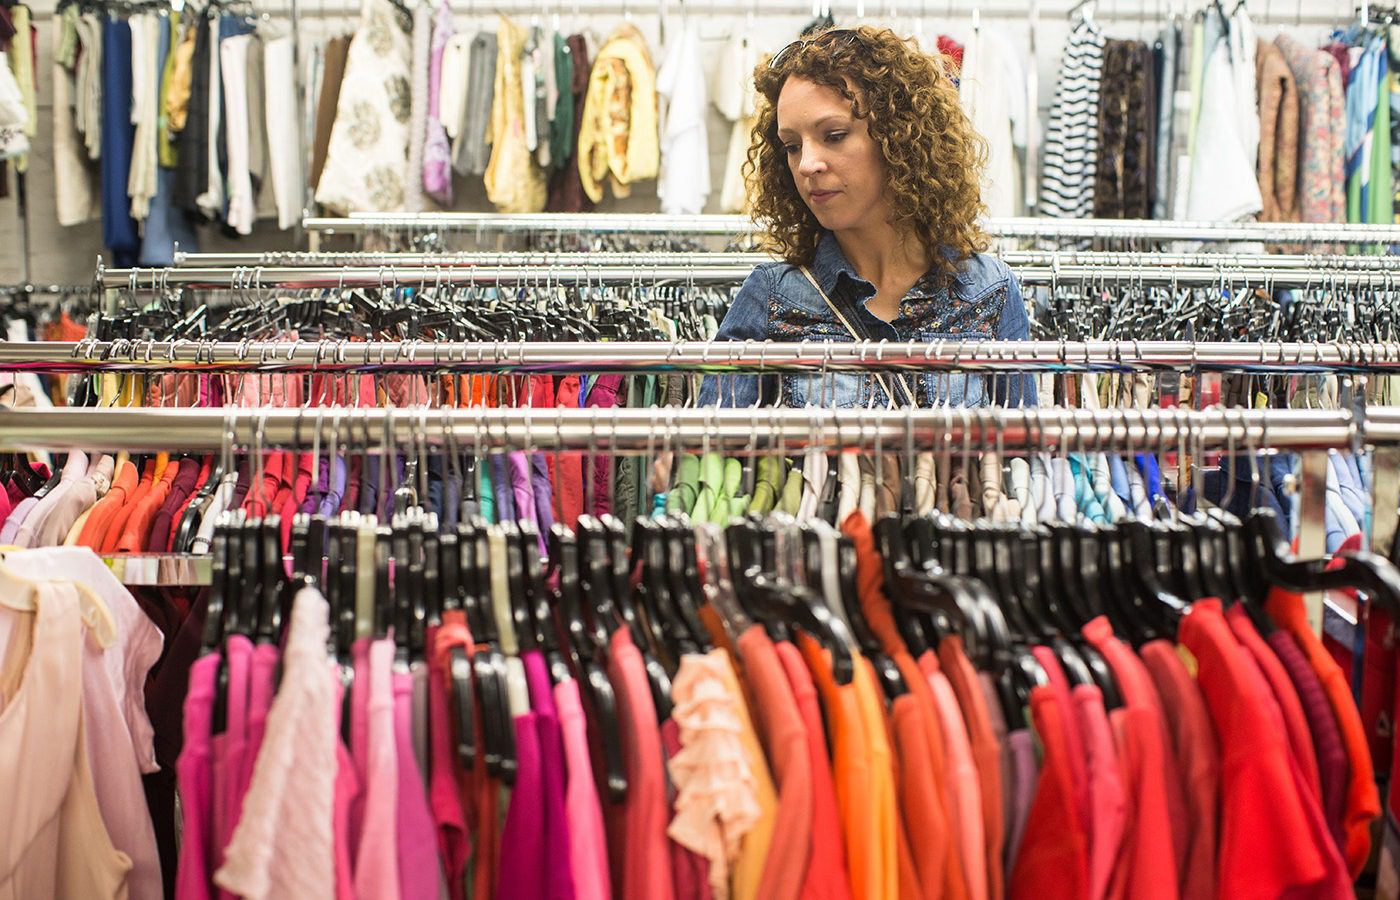 The Shift to Thrift